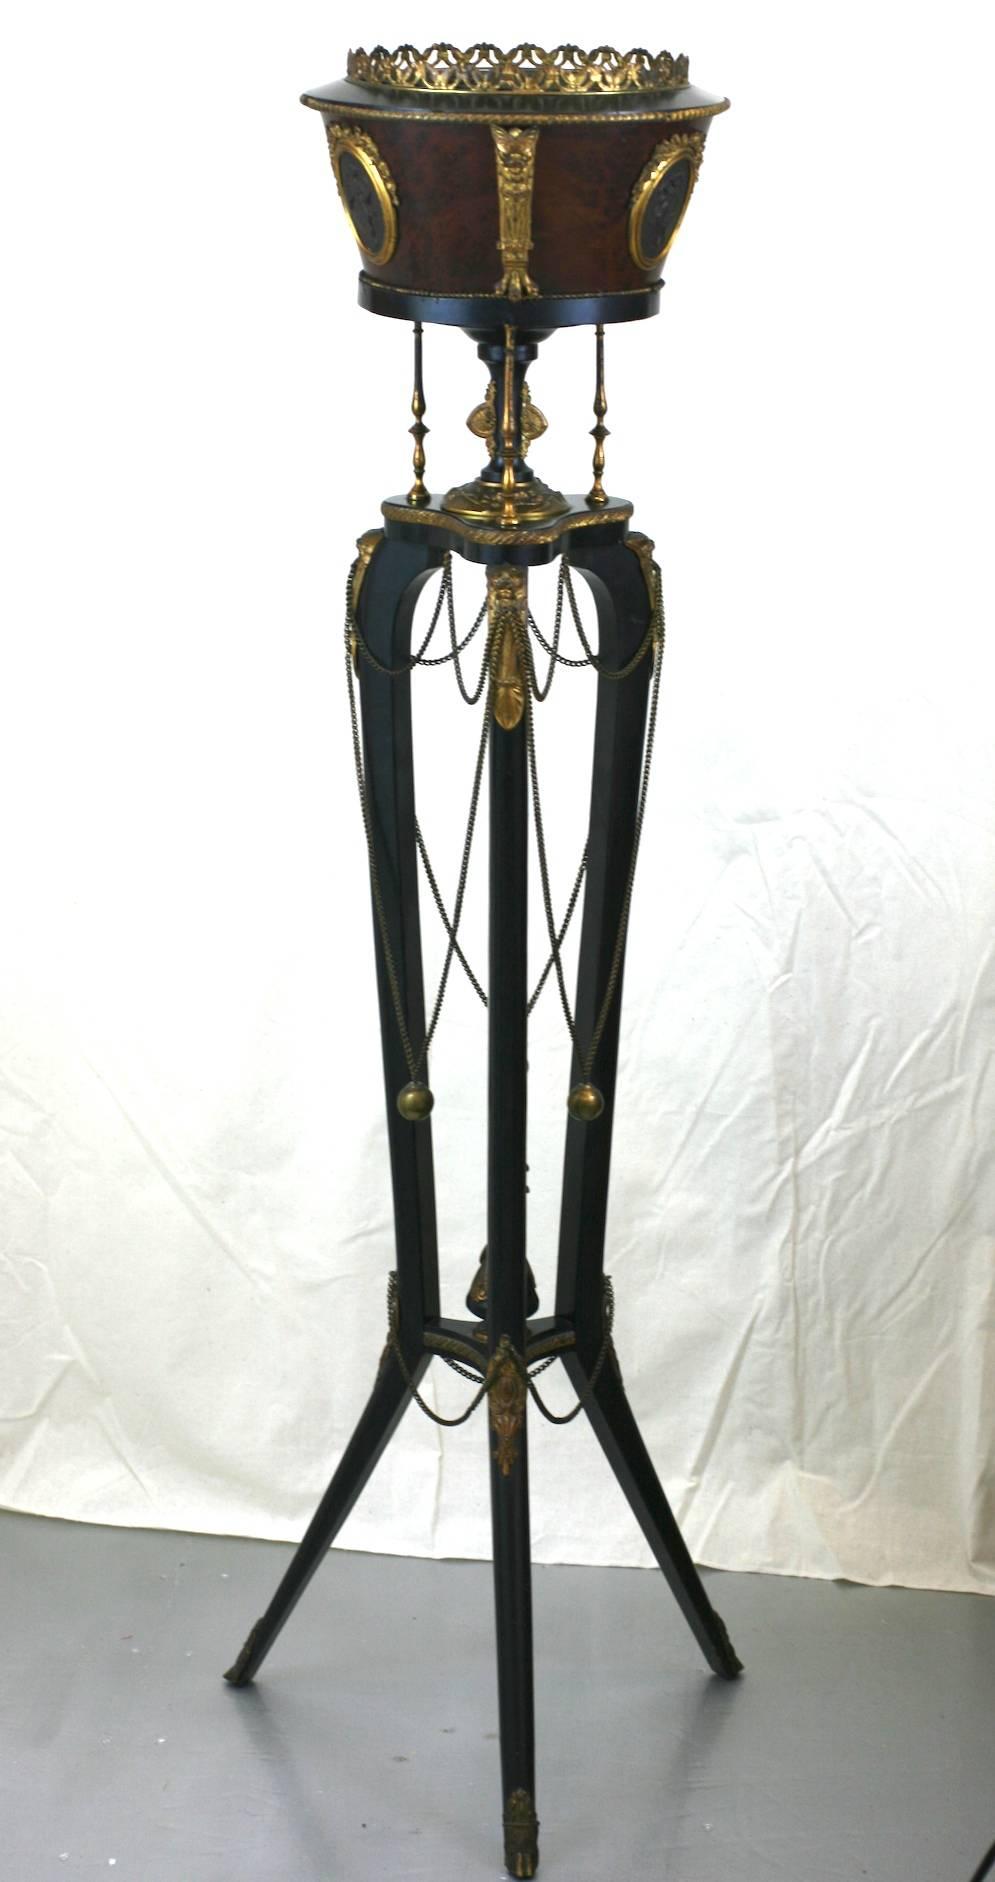 Tripod fern Stand of ebonized wood, burl veneer and mahogany in the Napoleon III style, which is the name commonly given to a 19th century style of Renaissance Revival that encompasses a myriad of Revivalist styles including Louis XVI, and